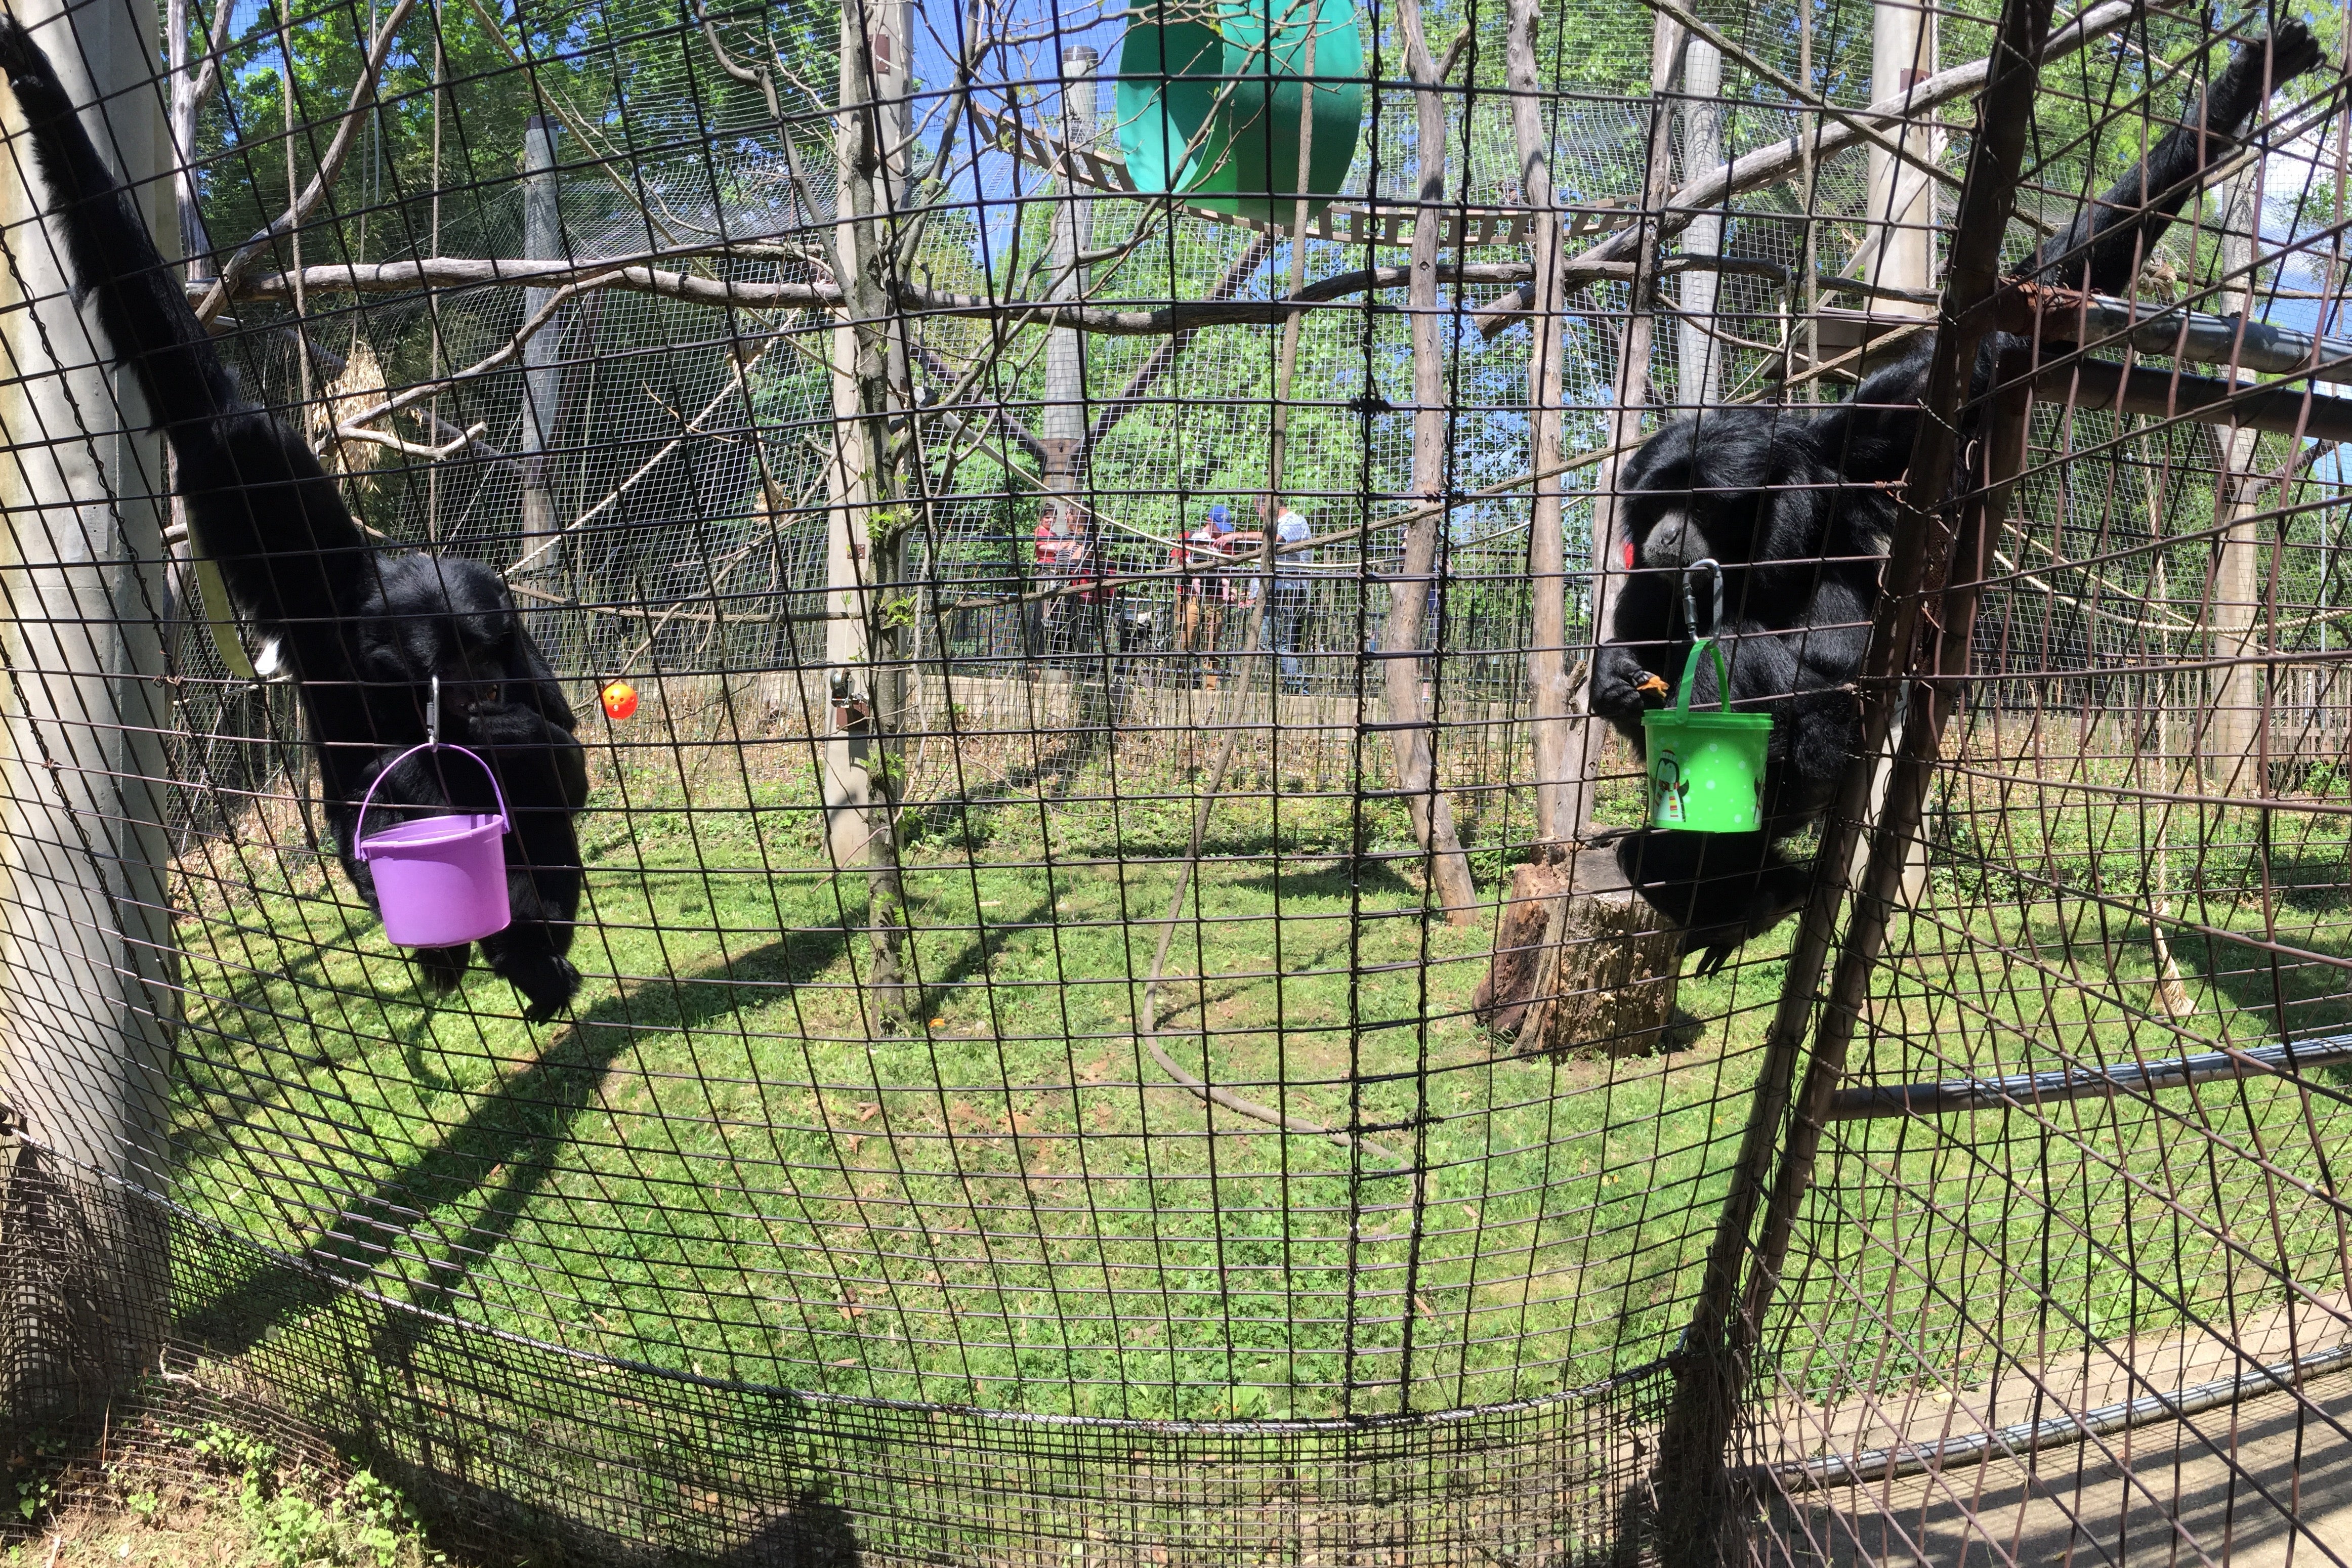 Siamang Afternoon Snack